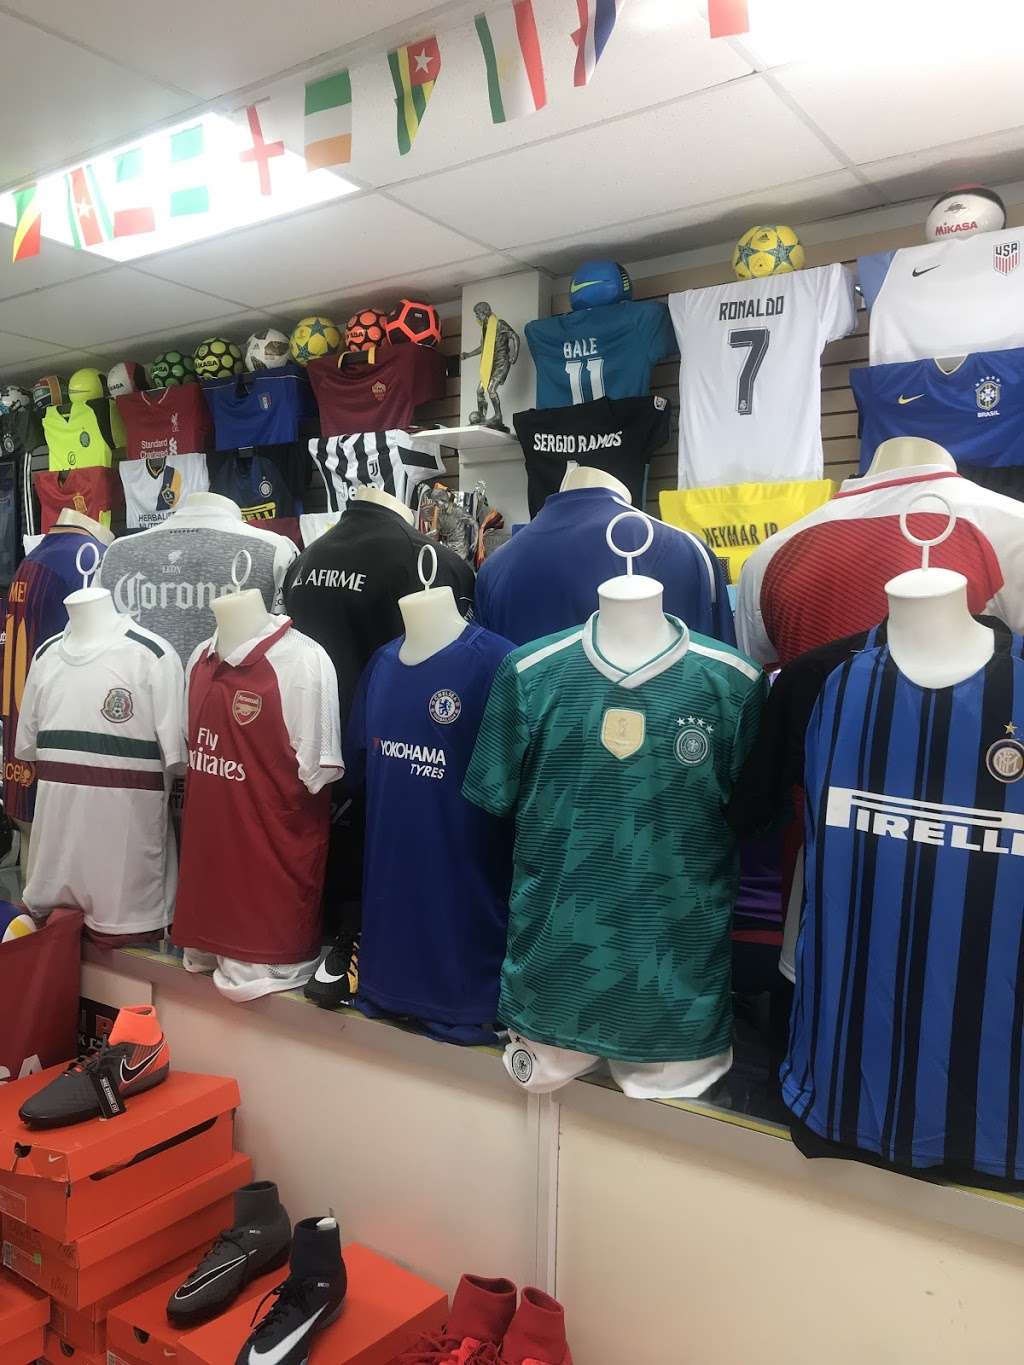 Only Sports Soccer | 3318 W Lawrence Ave, Chicago, IL 60625 | Phone: (773) 509-9000